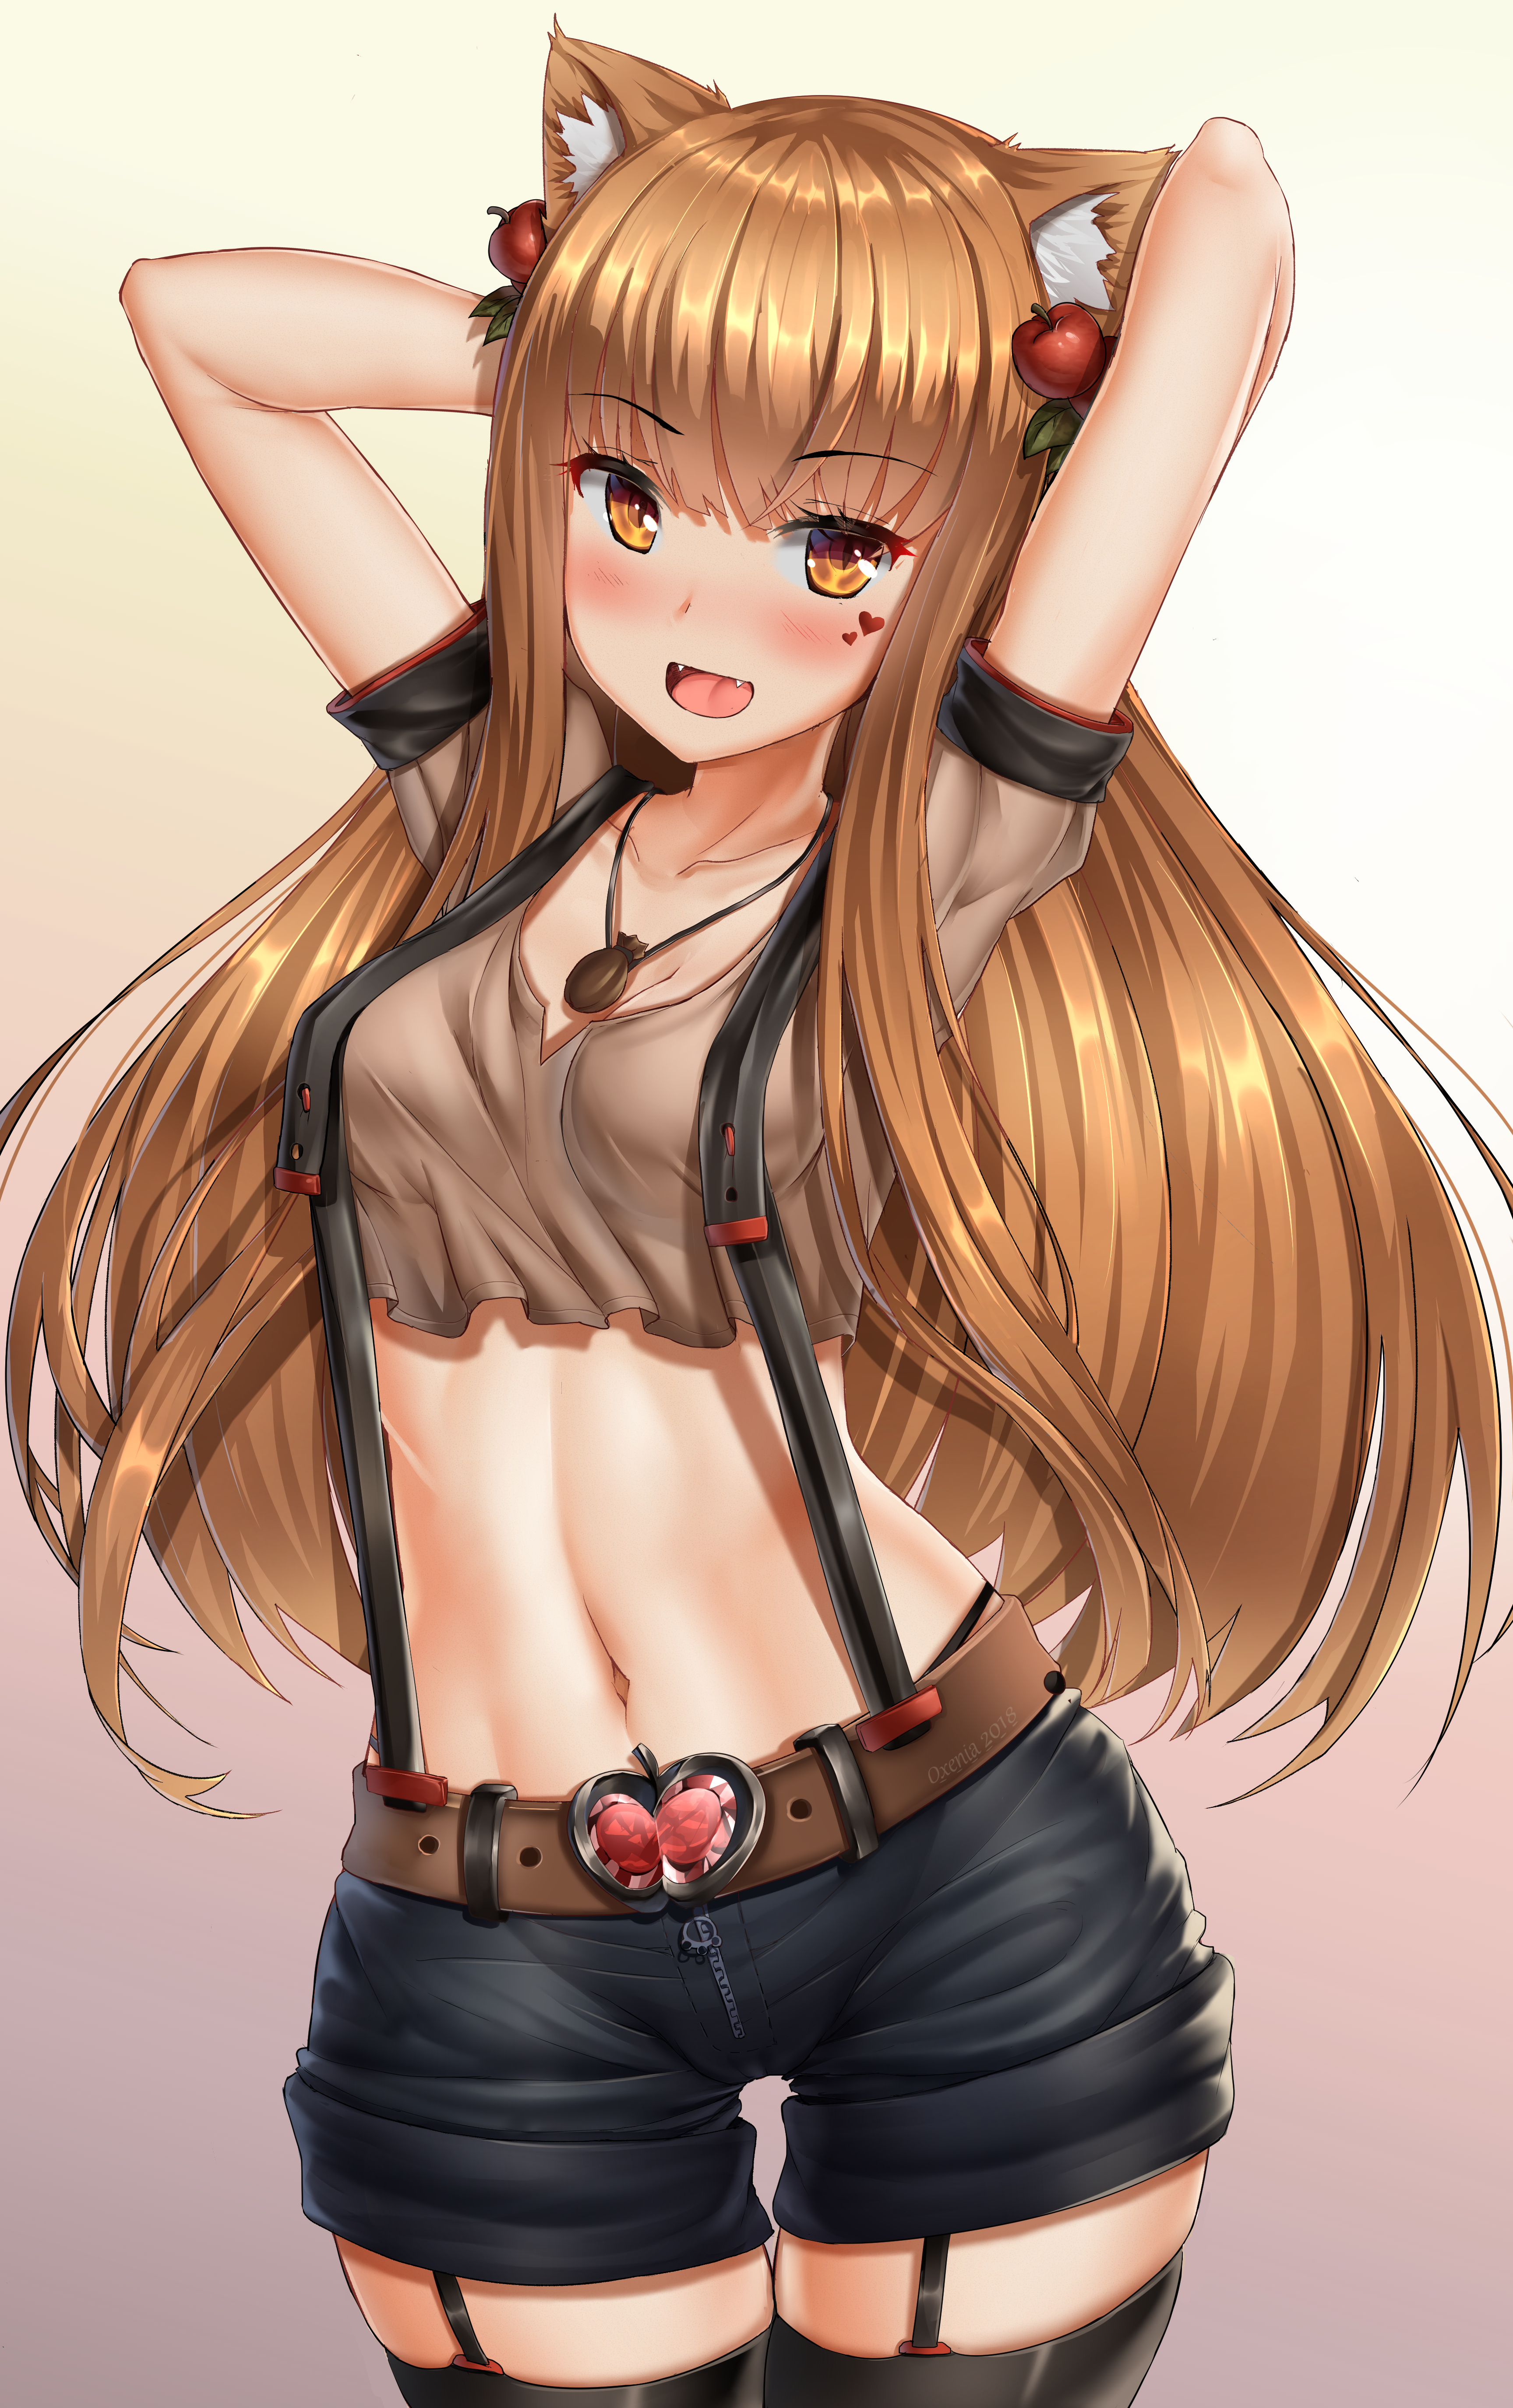 Anime Girls Spice And Wolf Holo Spice And Wolf Oxenia Smiling Short Pants Arms Up Brunette Brown Eye 3455x5500